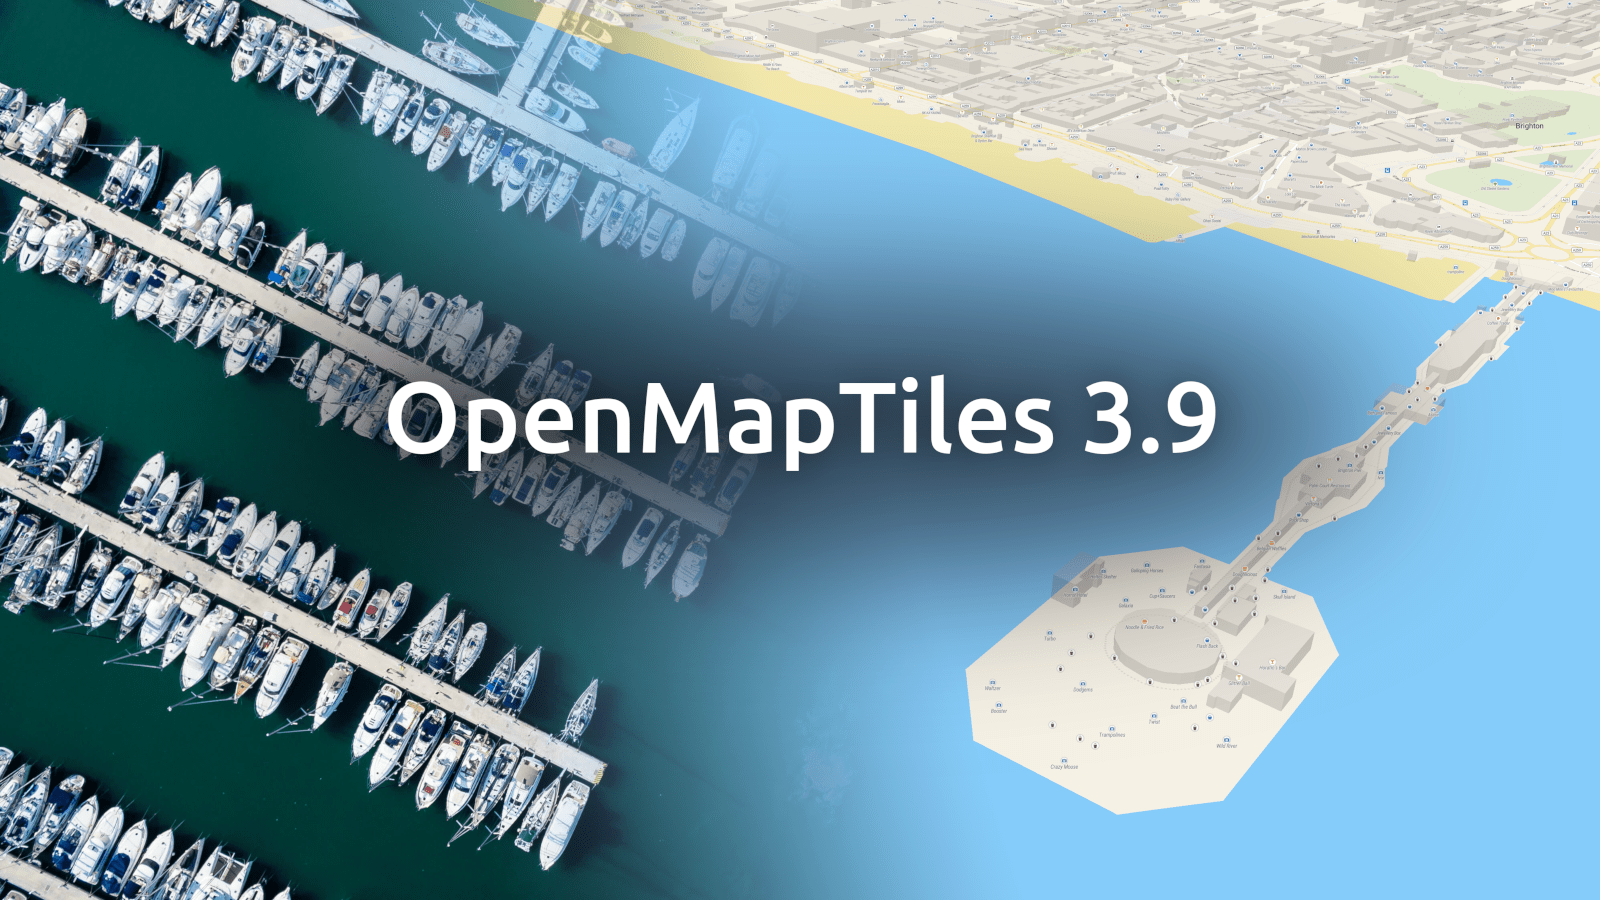 OpenMapTiles 3.9 with docks, piers, and multilingual street names image